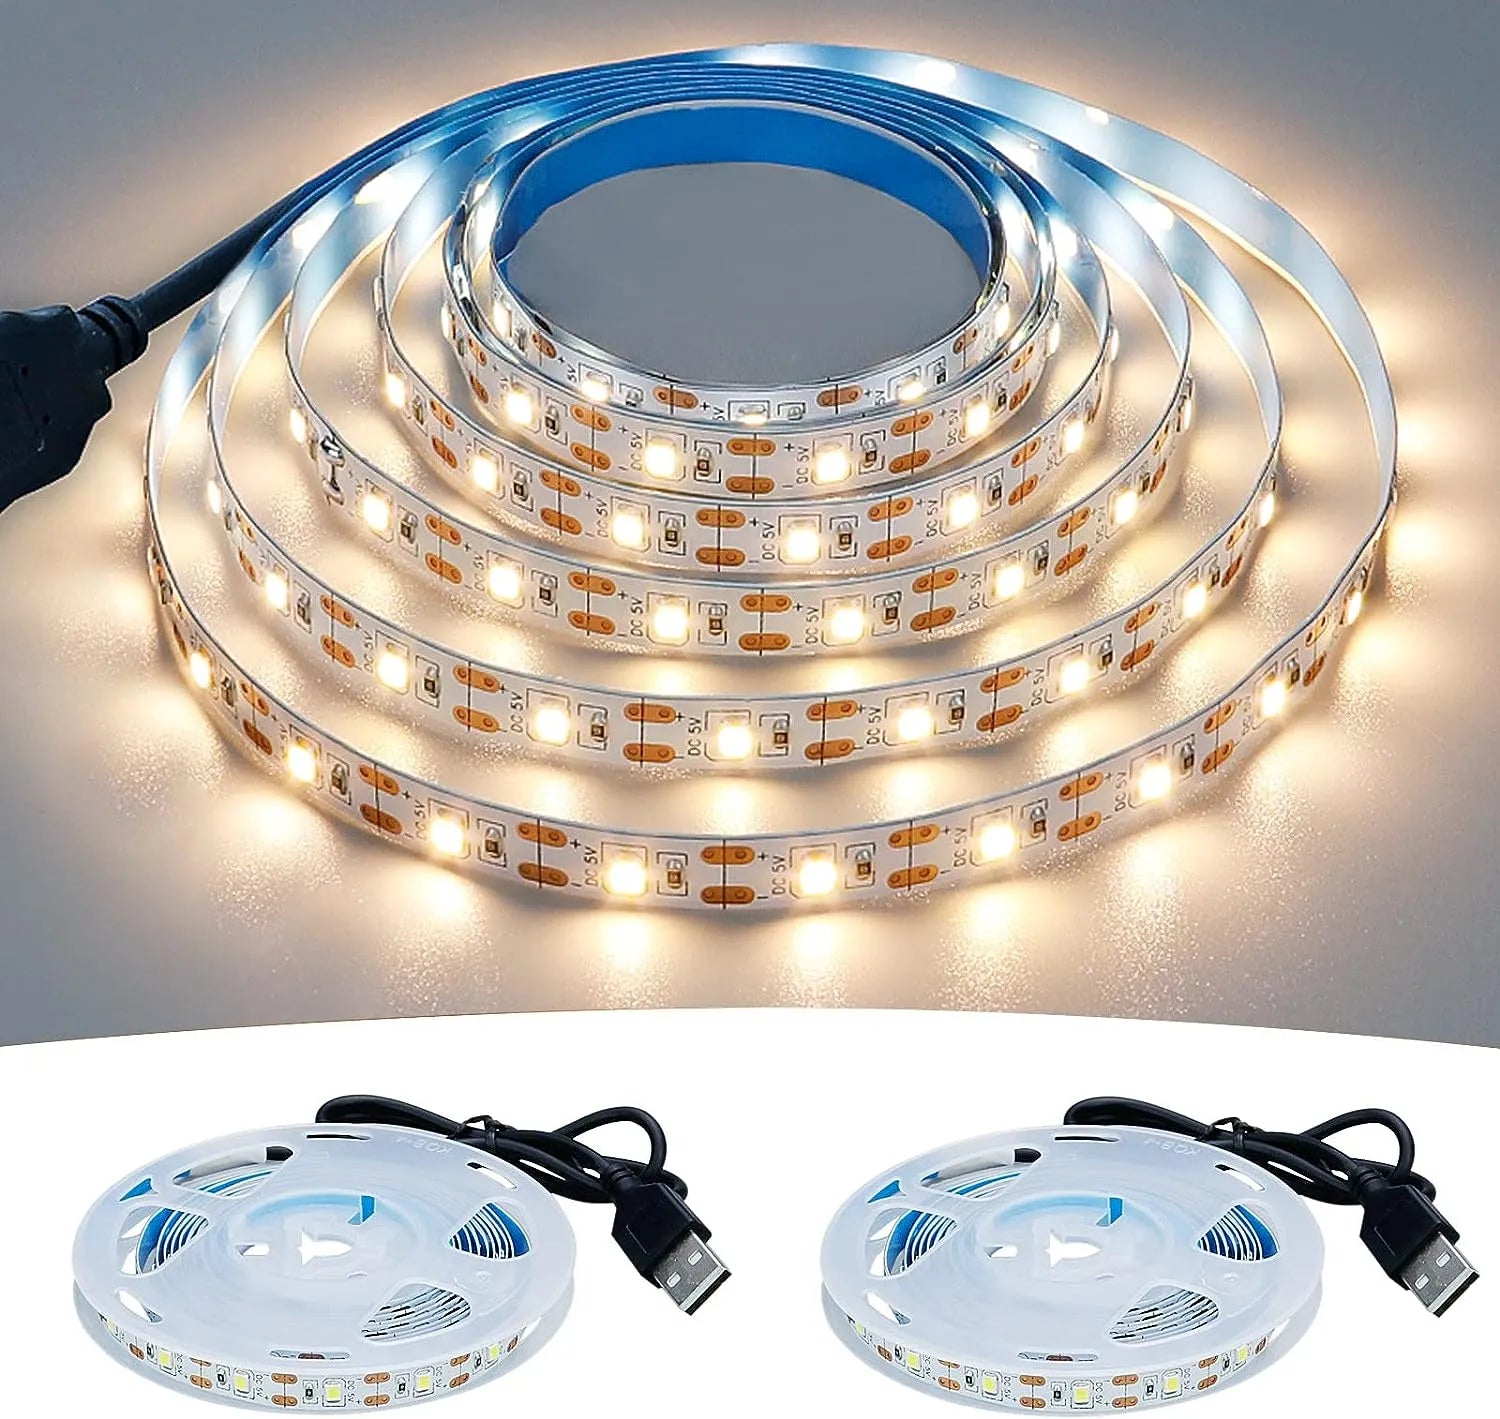 Warm Glow LED Strip Lights: Elevate Home Decor with Ambient Lighting  ourlum.com   